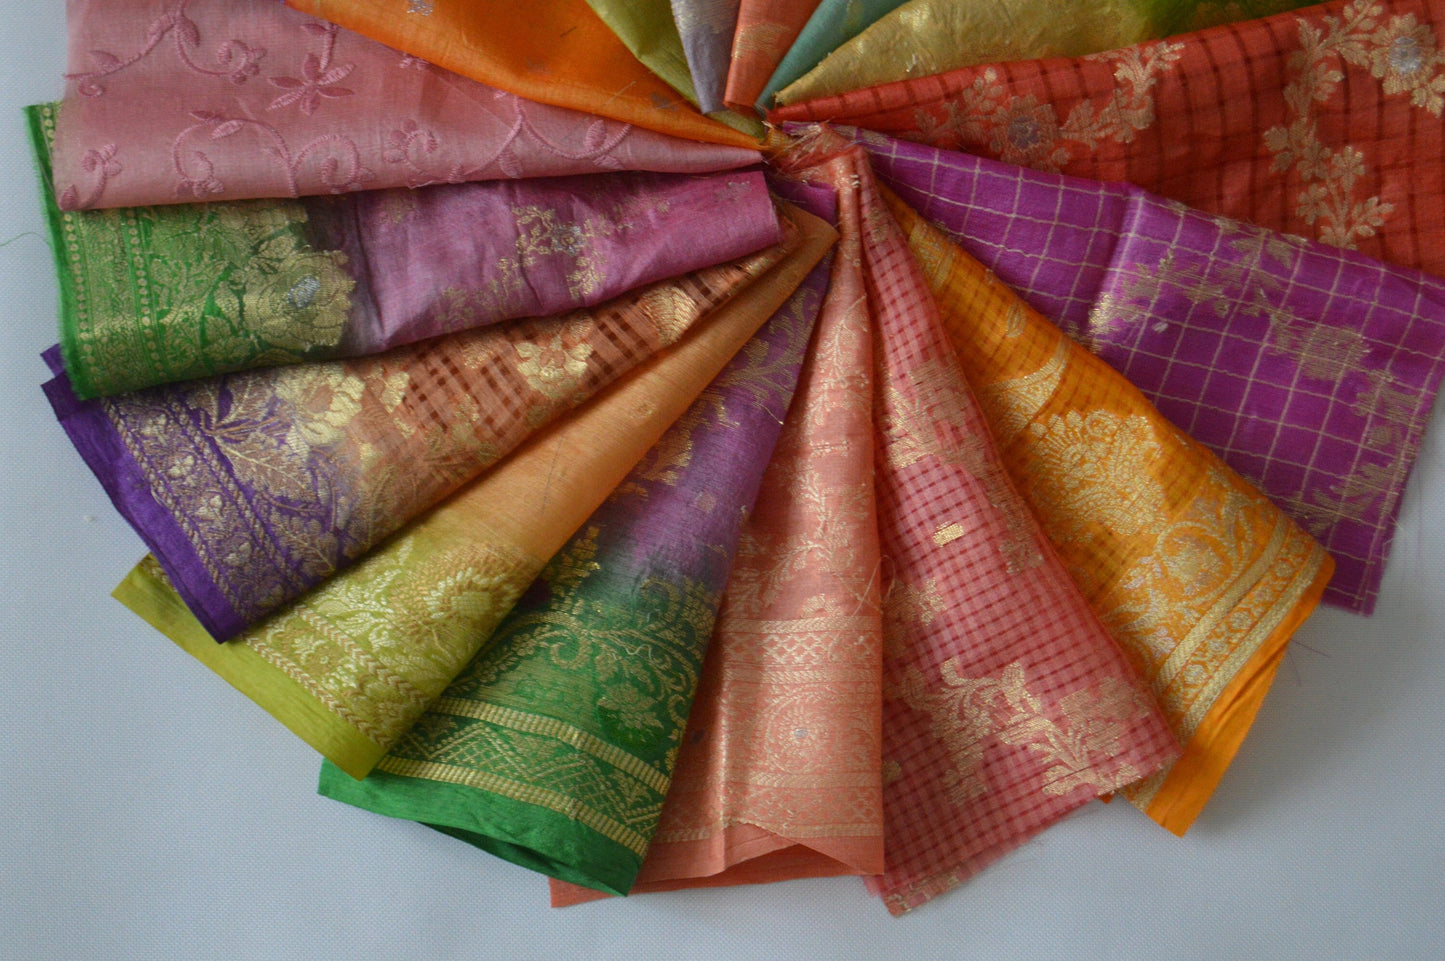 5 Inch x 16 Pieces Mixed Colour Recycled Vintage Sari Scraps Remnant Brocade Craft Fabric Collage Mixed Media Textile Art Junk Journals